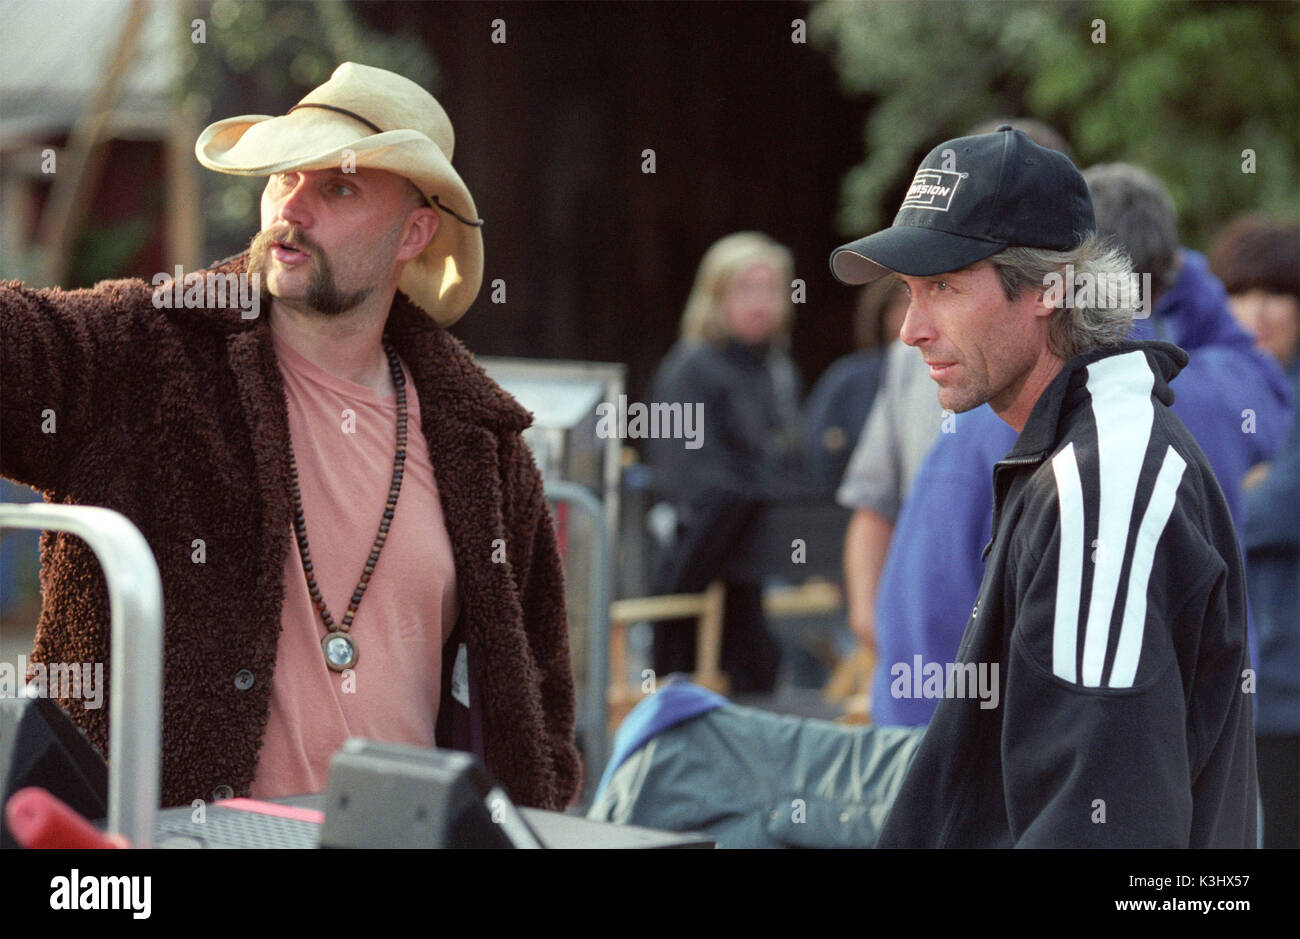 THE TEXAS CHAINSAW MASSACRE  Director MARCUS NISPEL, Producer MICHAEL BAY     Date: 2003 Stock Photo